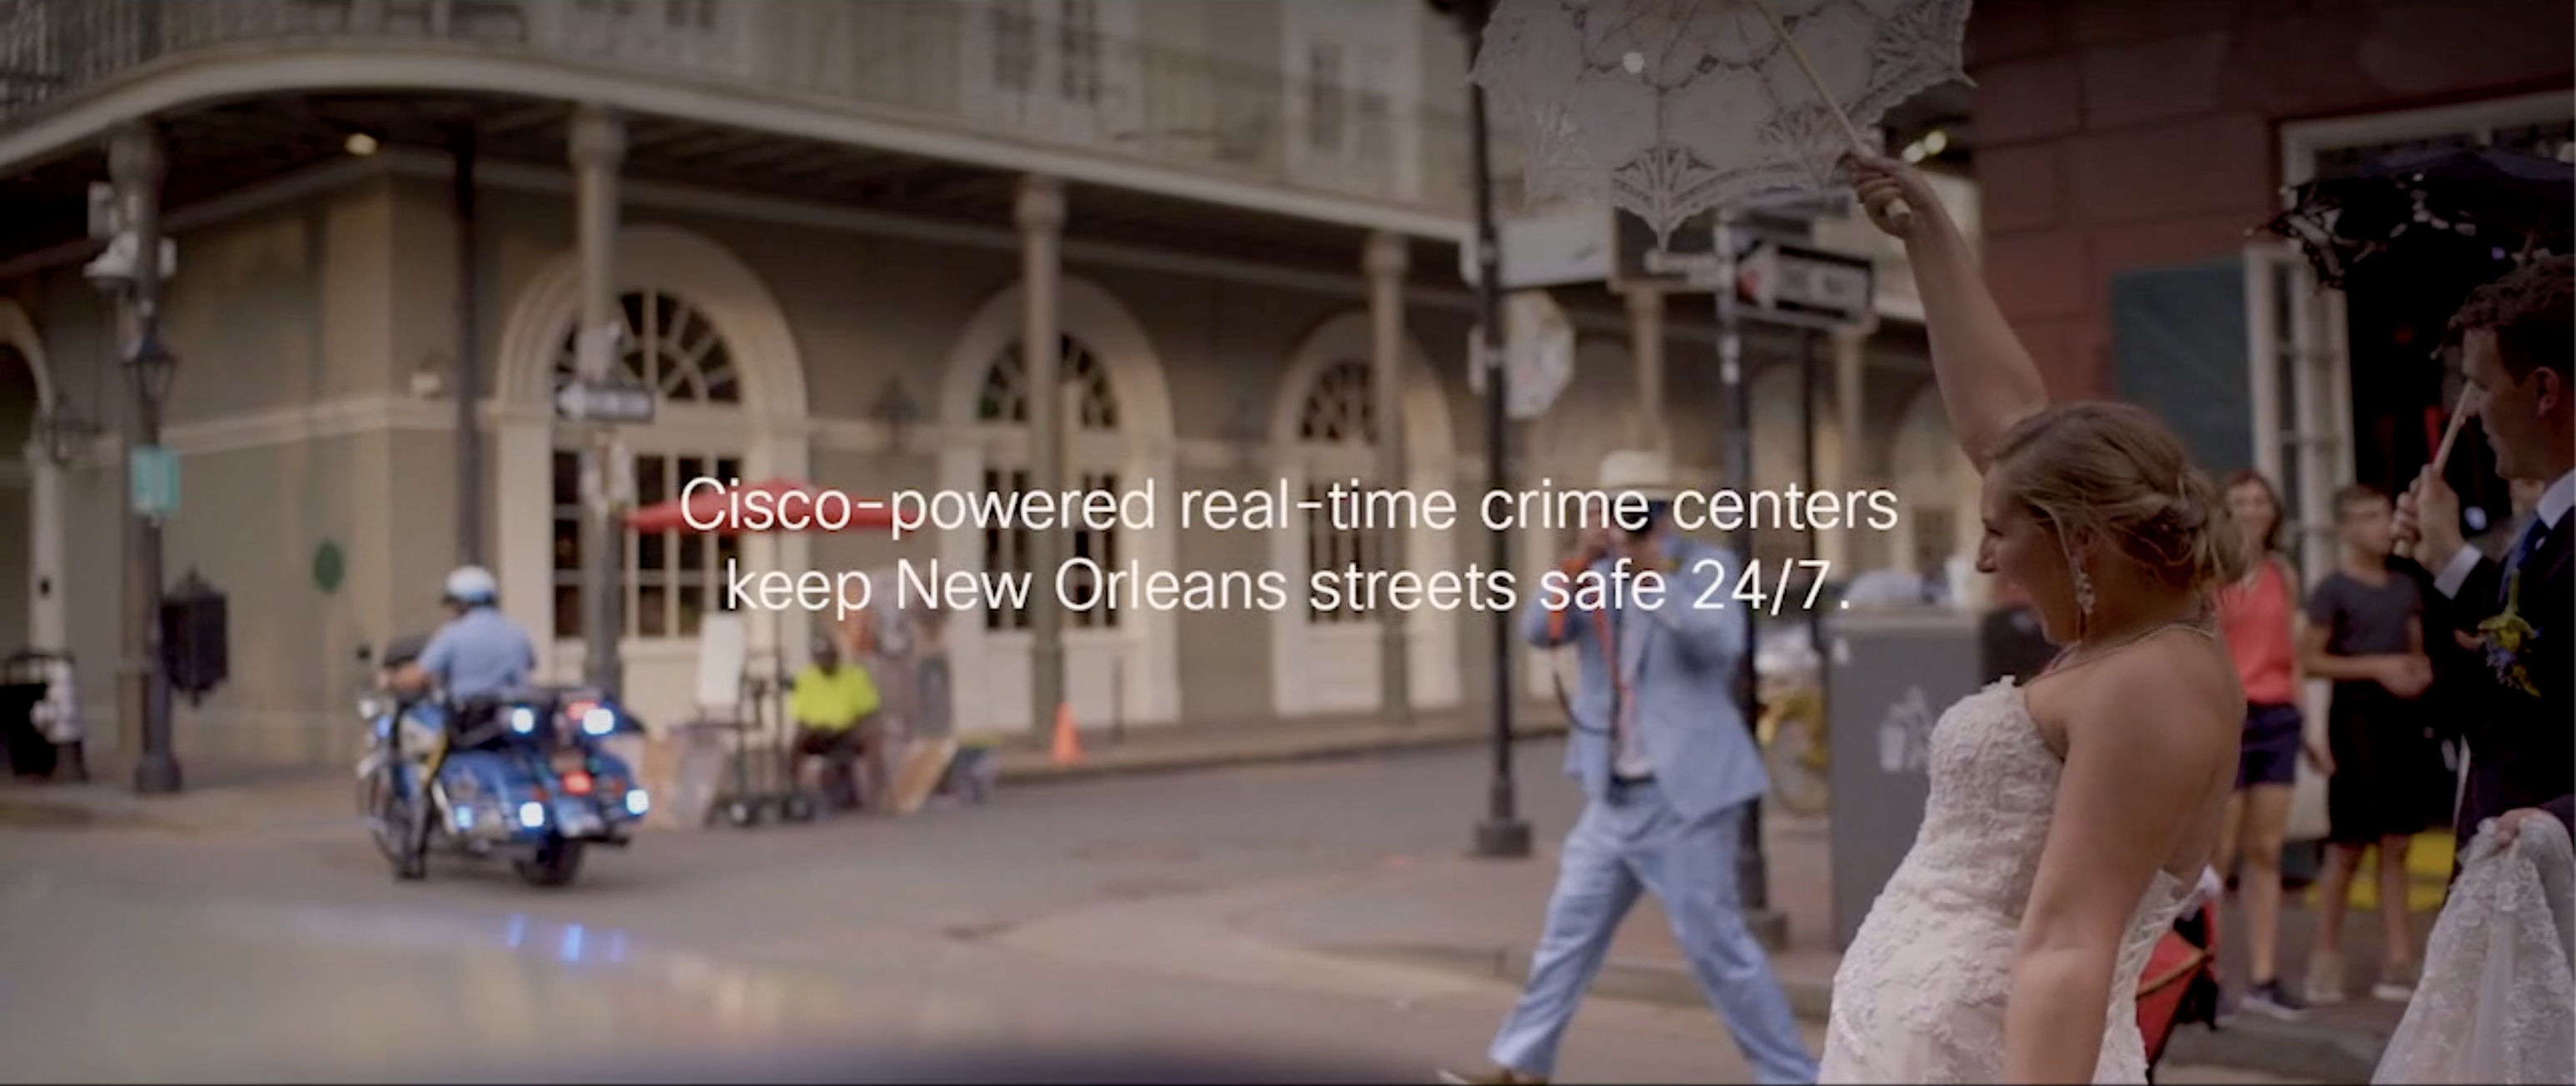 Cisco-powered real-time crime centers help keep New Orleans streets safe 24/7